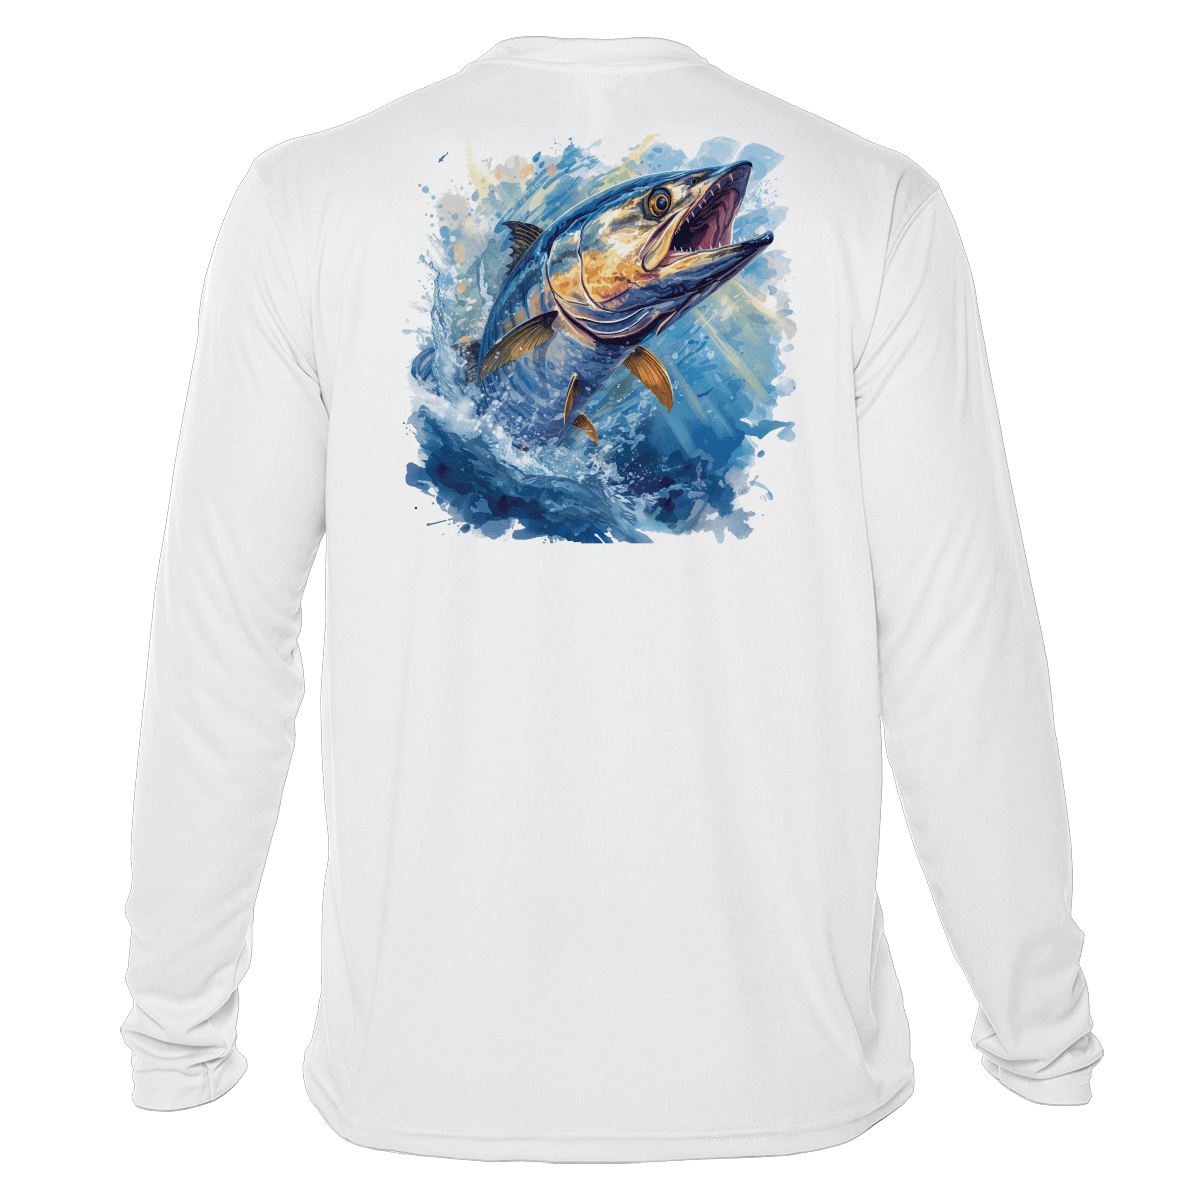 Fishing Shirt Outfitters - Angler's Collection: King Mackerel - UPF 50+ Long Sleeve - White,3XLG